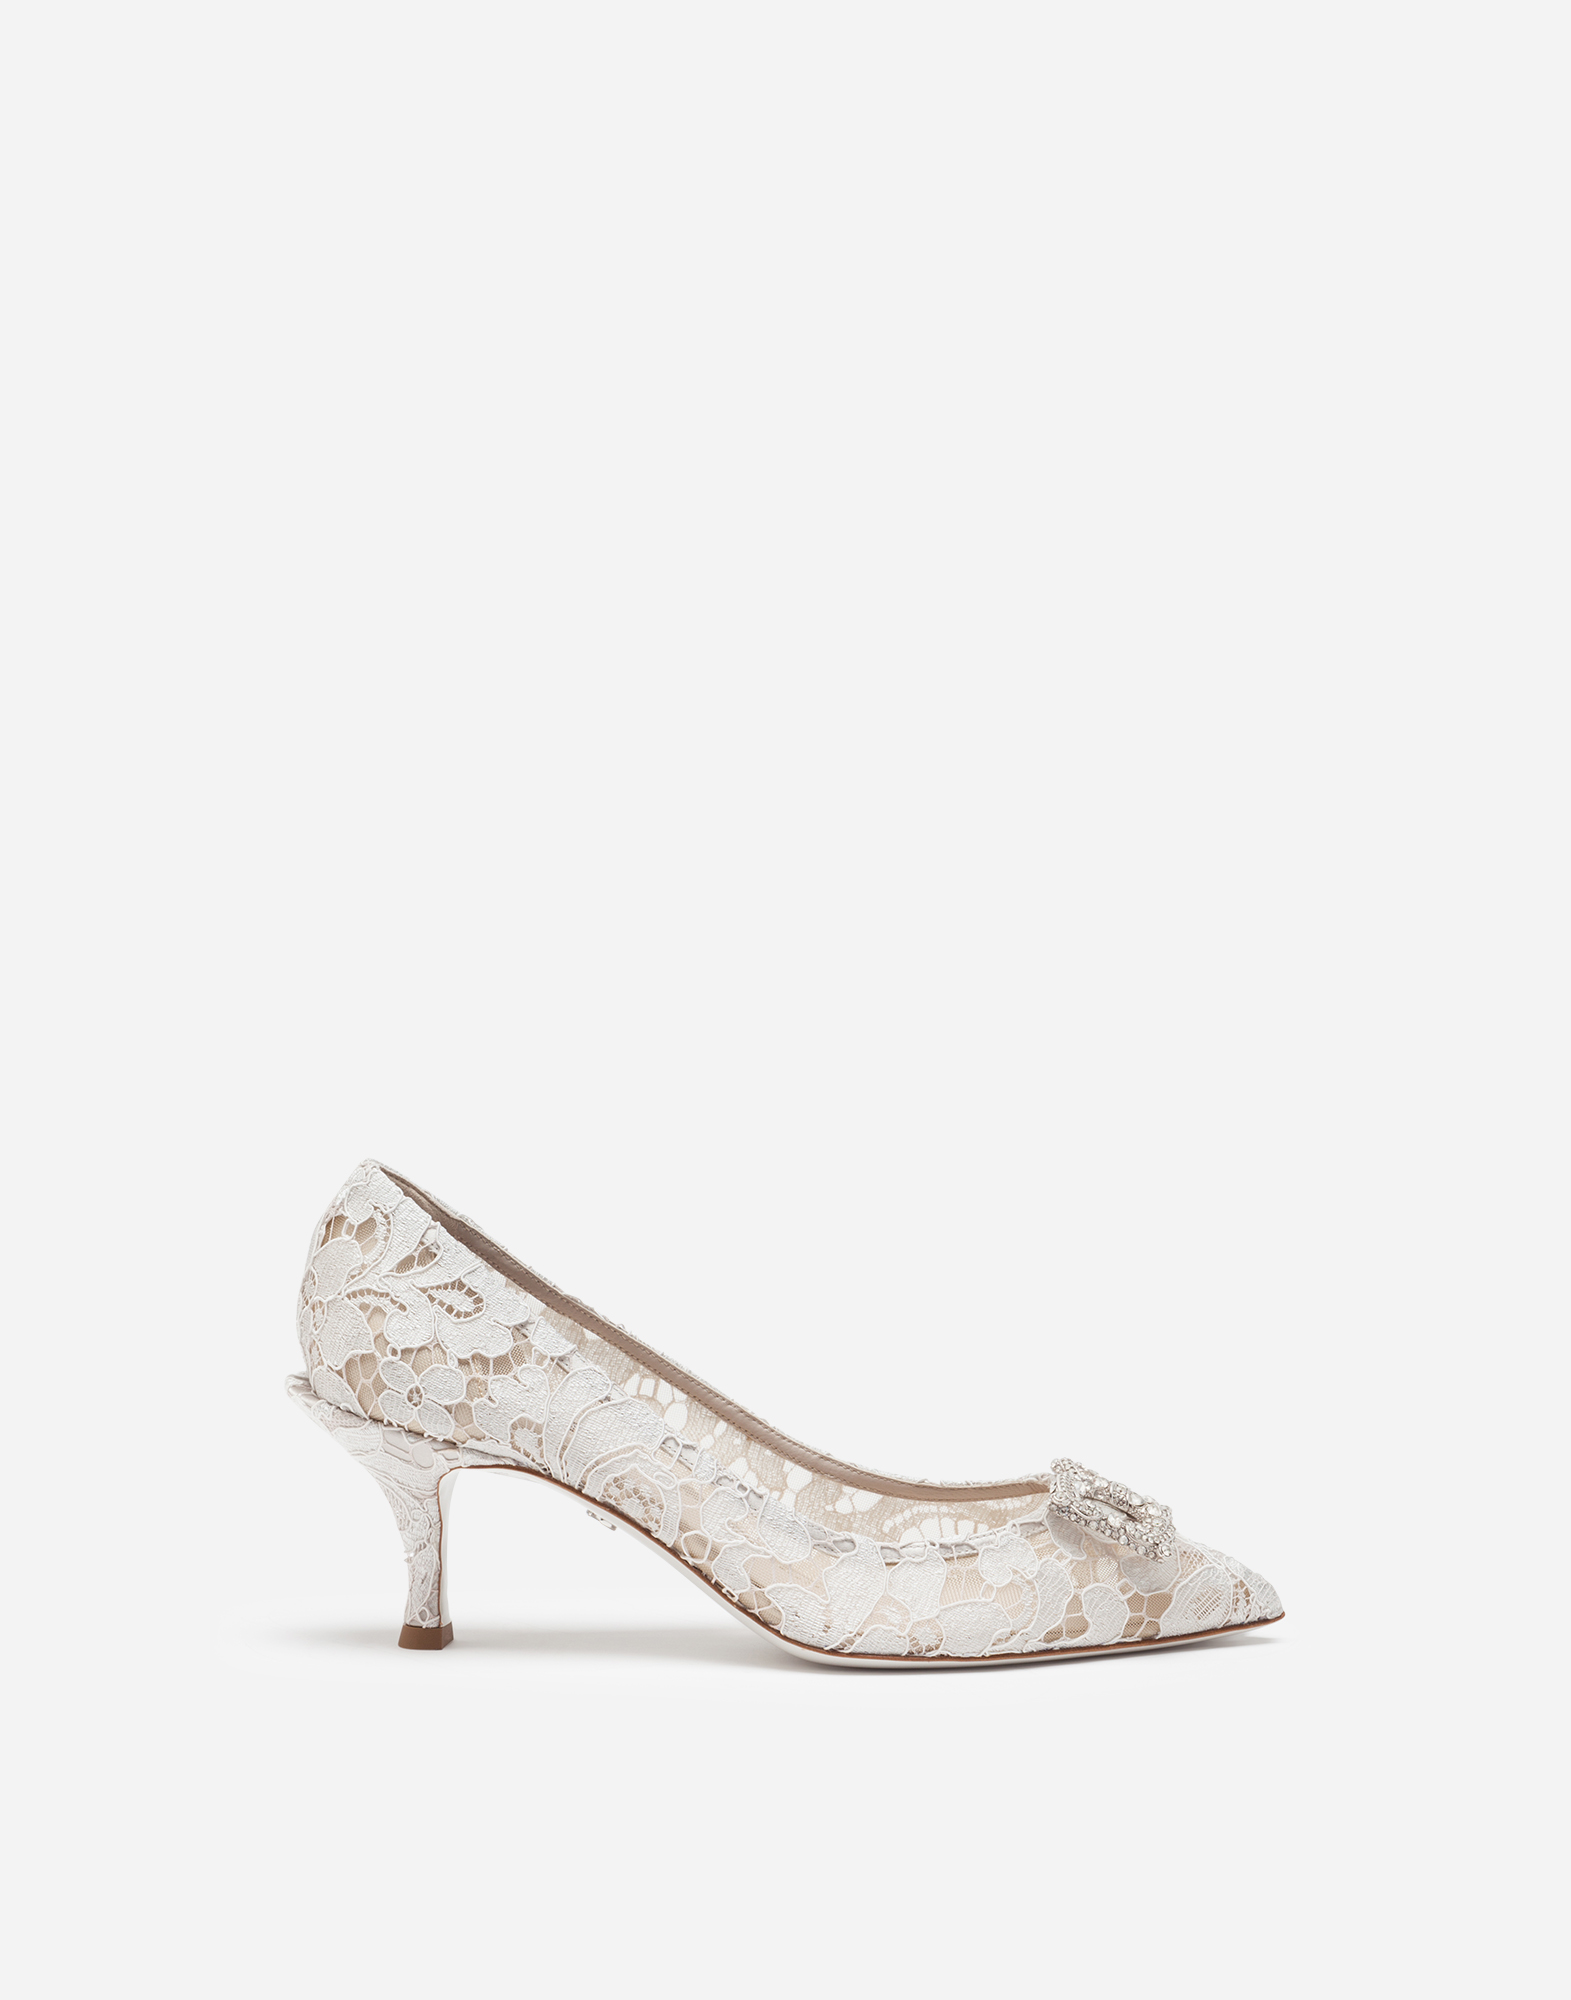 Taormina lace pumps with DG Amore logo in Grey